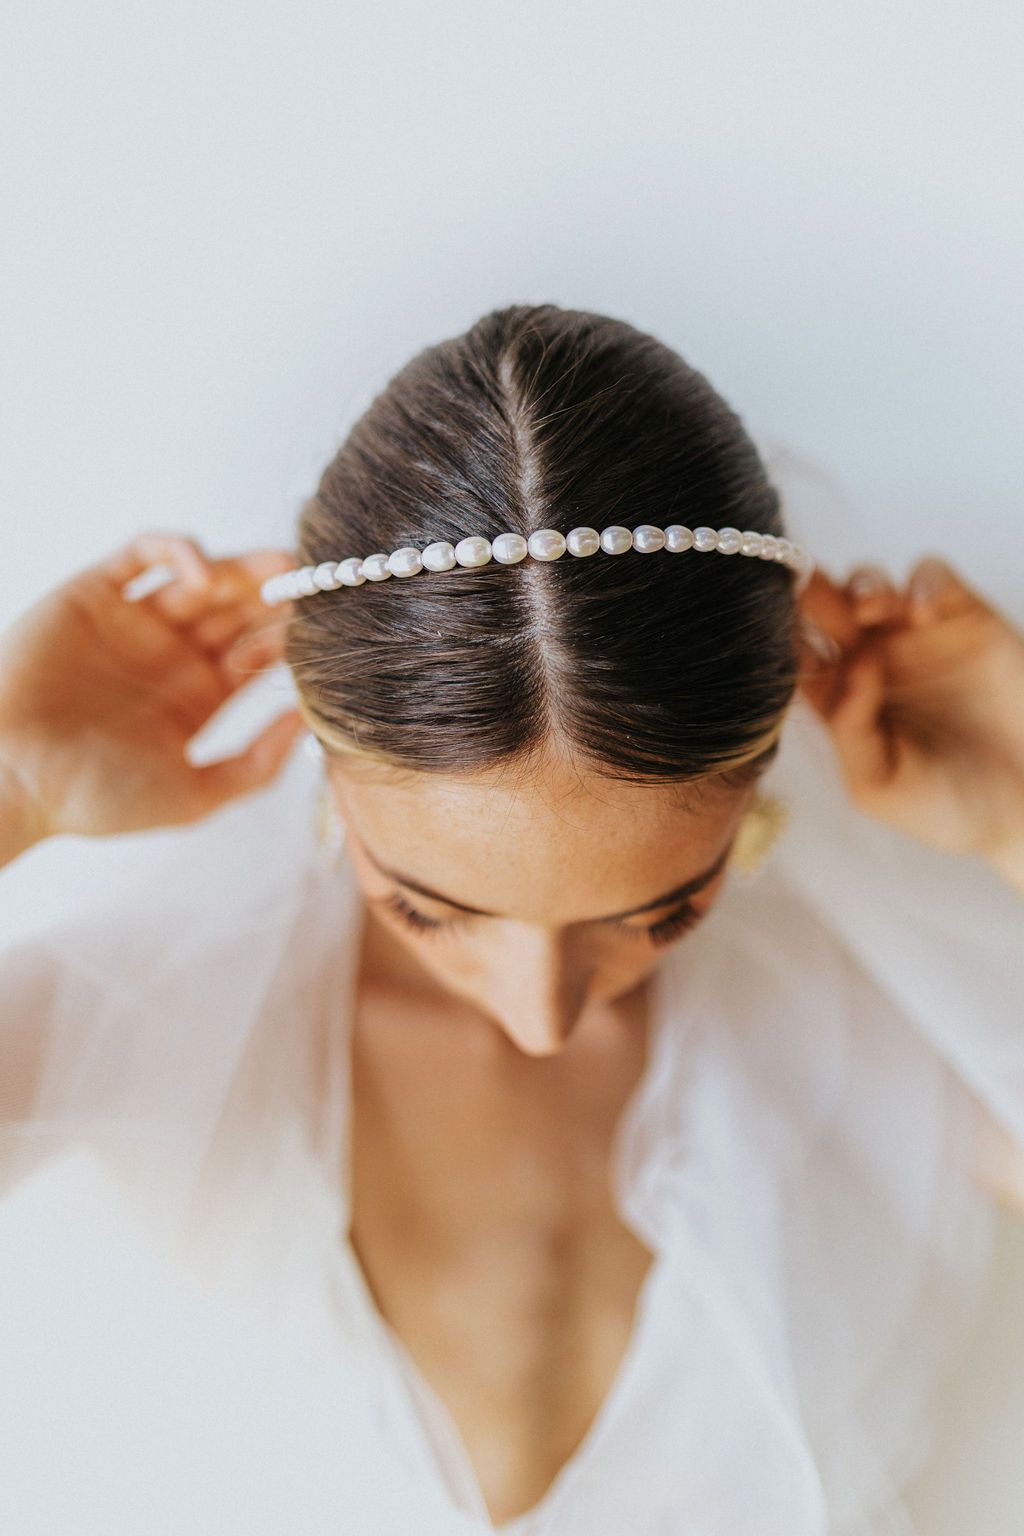 Logan Pearl Headband by Untamed Petals available for purchase at Revelle Bridal Hair Accessories in Ottawa